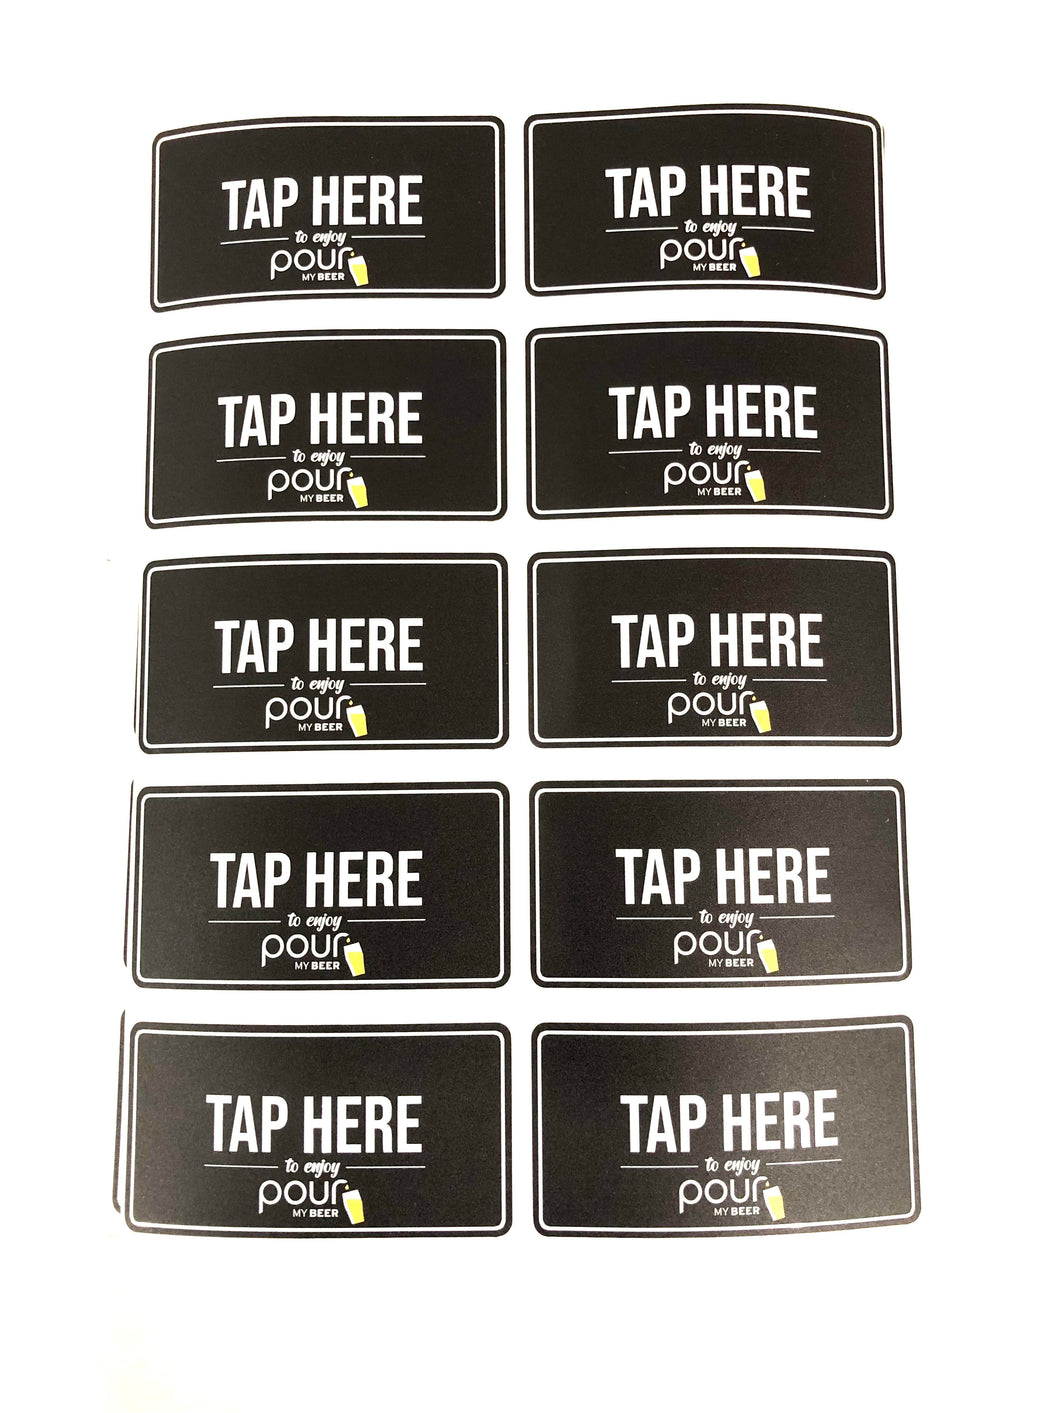 Tap to Pour Vinyl Stickers - Sheet of 10 stickers